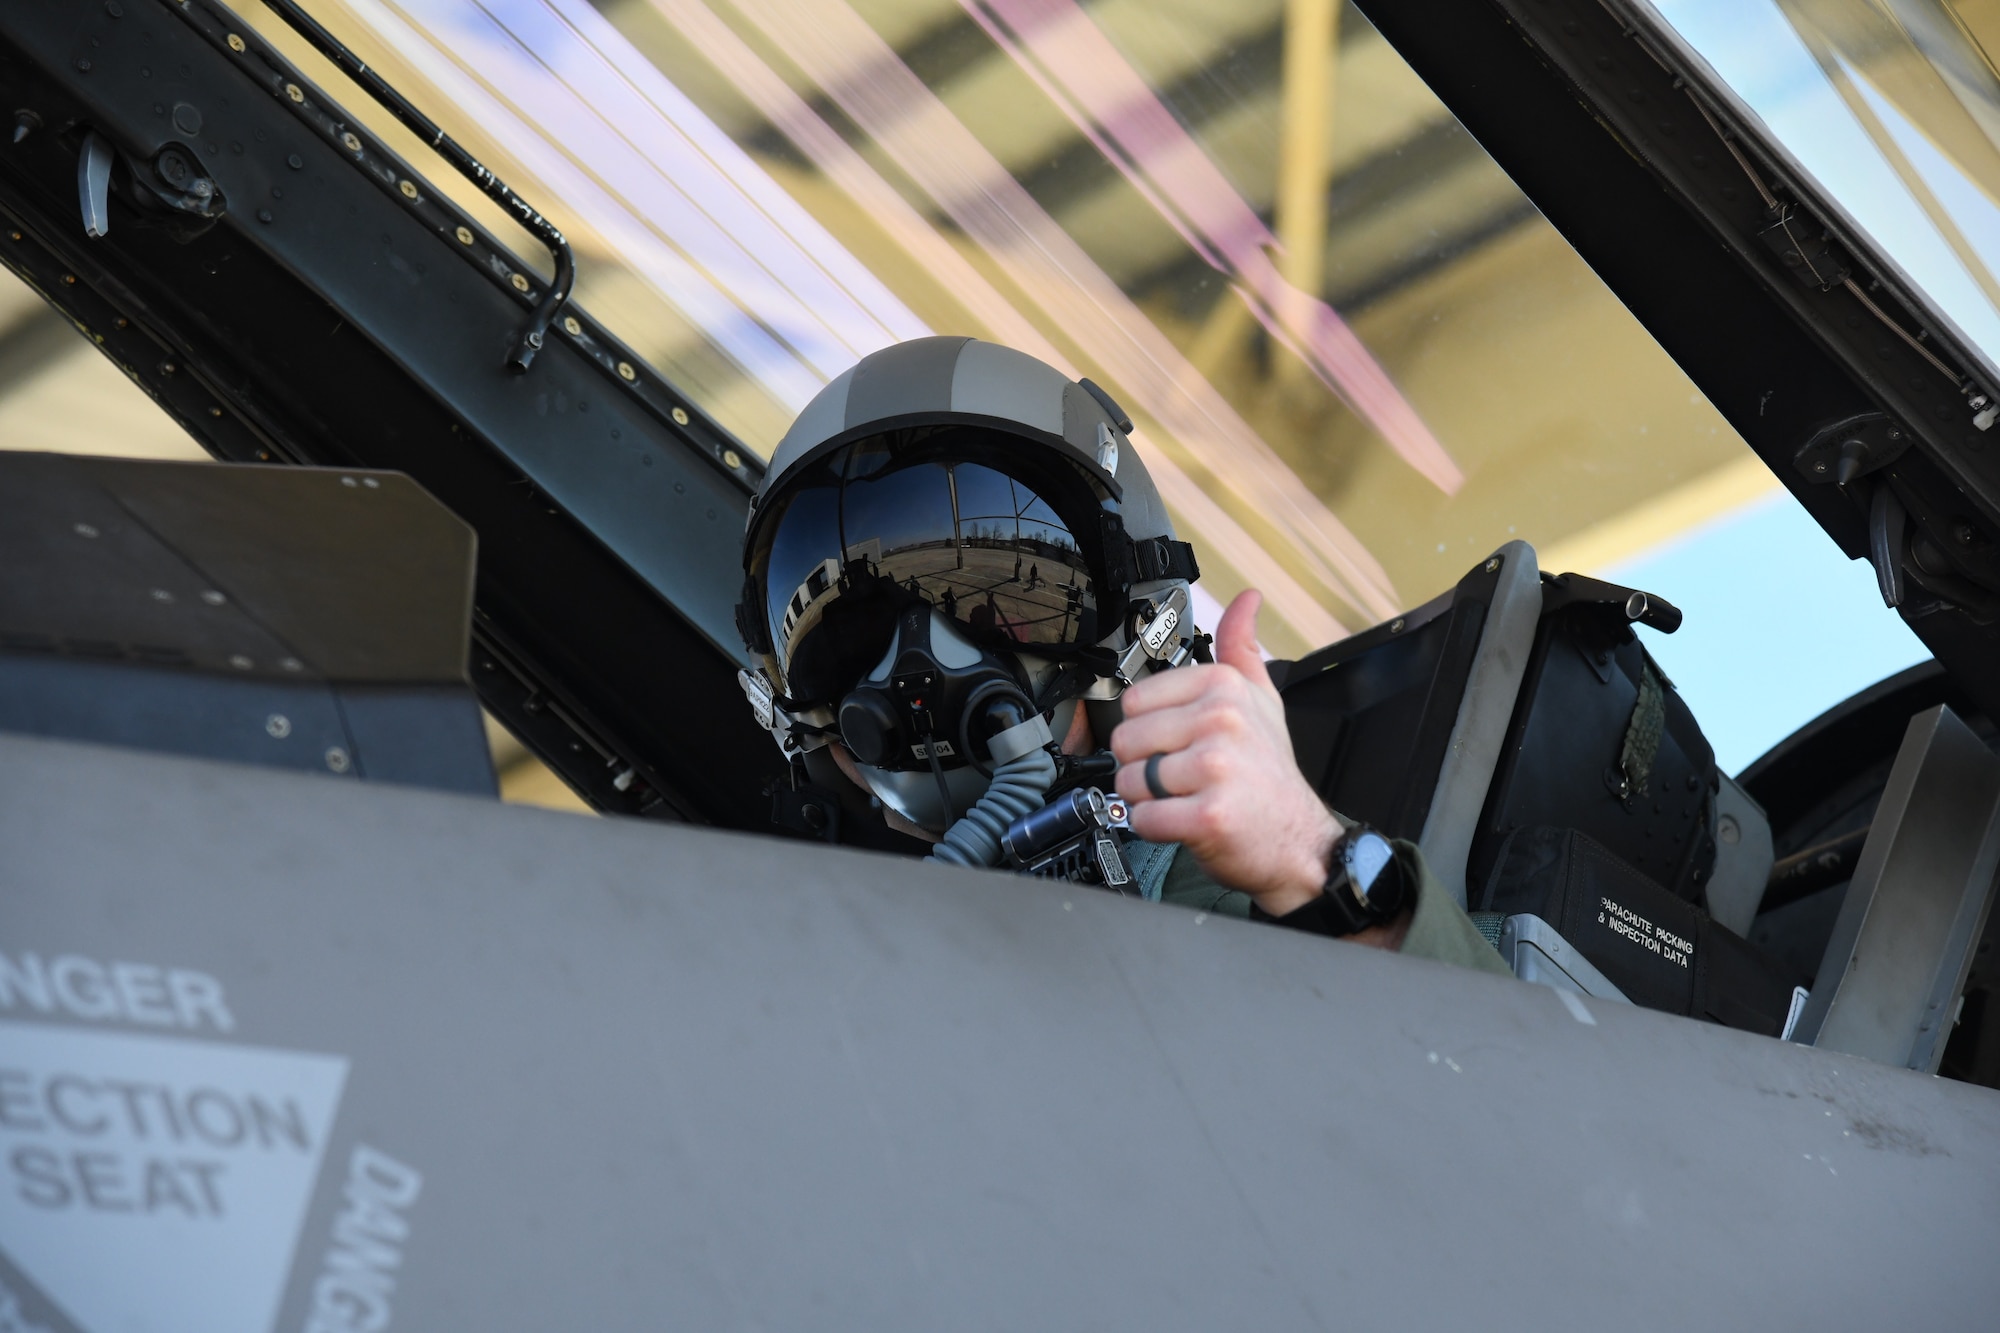 Cadets from the Georgetown University Army ROTC program, also known as the Hoya Battalion, visited Joint Base Andrews, March 18, 2022. They were fitted for flight equipment and flew in the backseat of F-16s from the 113th Wing, D.C. Air National Guard.